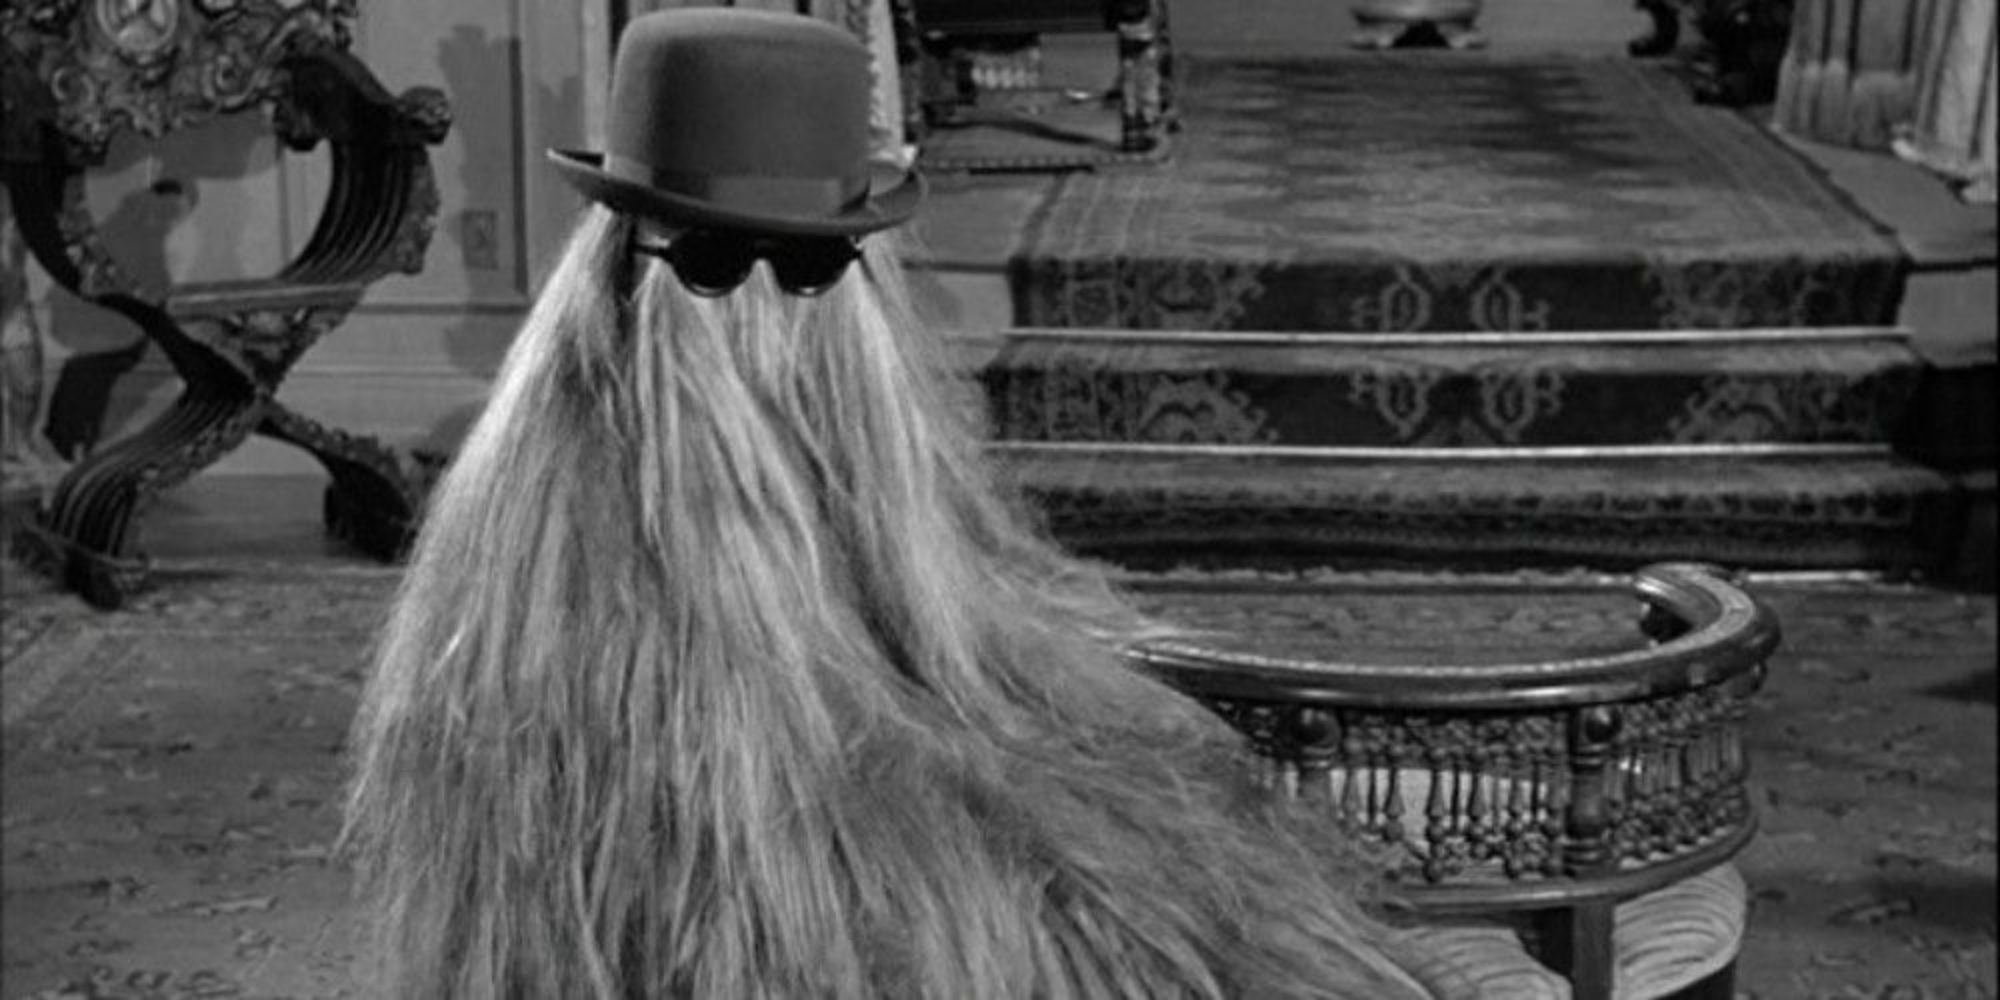 Cousin Itt with his hat and glasses in The Addams Family sitcom